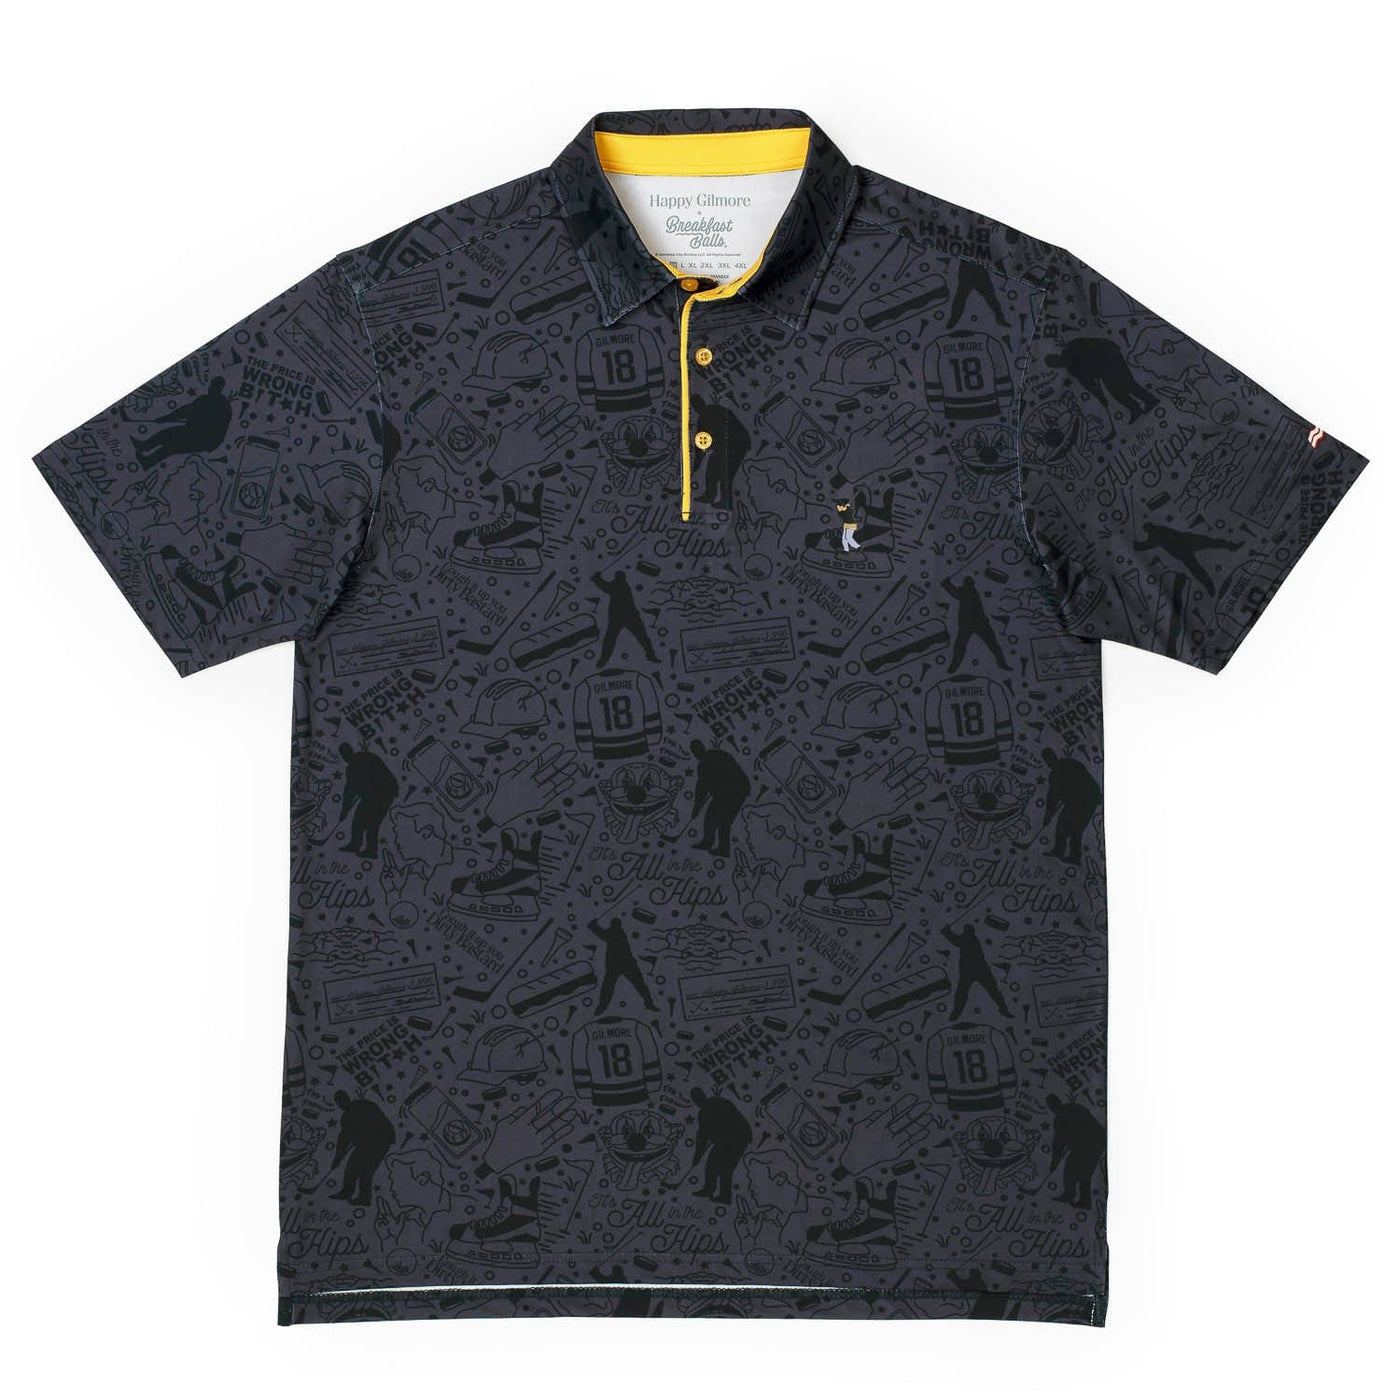 Happy Gilmore "Just Tap It In" - All Day Polo Shirt